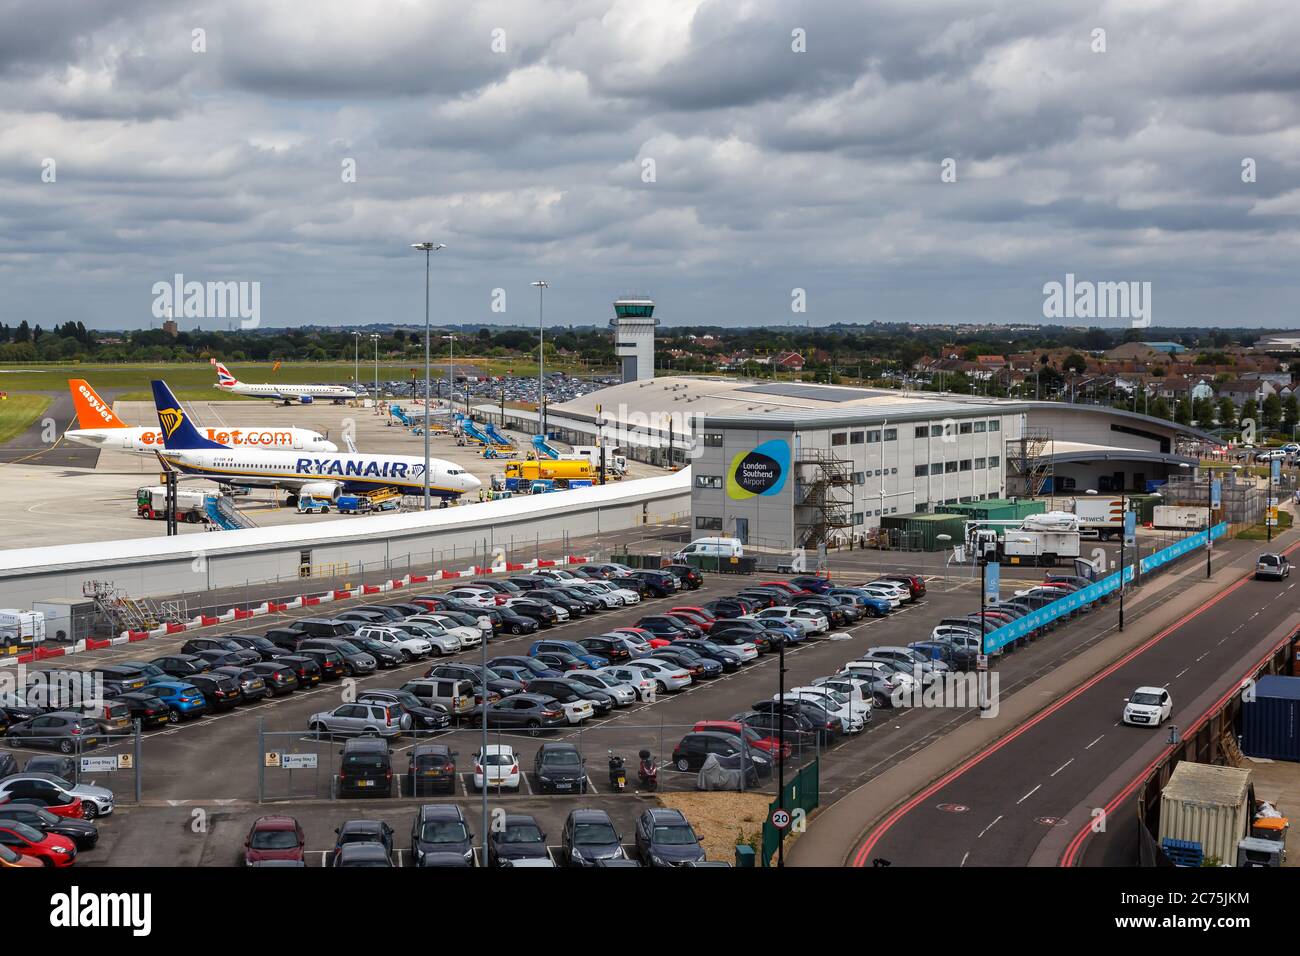 Southend, United Kingdom - July 7, 2019: Ryanair and EasyJet airplanes at London Southend airport (SEN) in the United Kingdom. Stock Photo